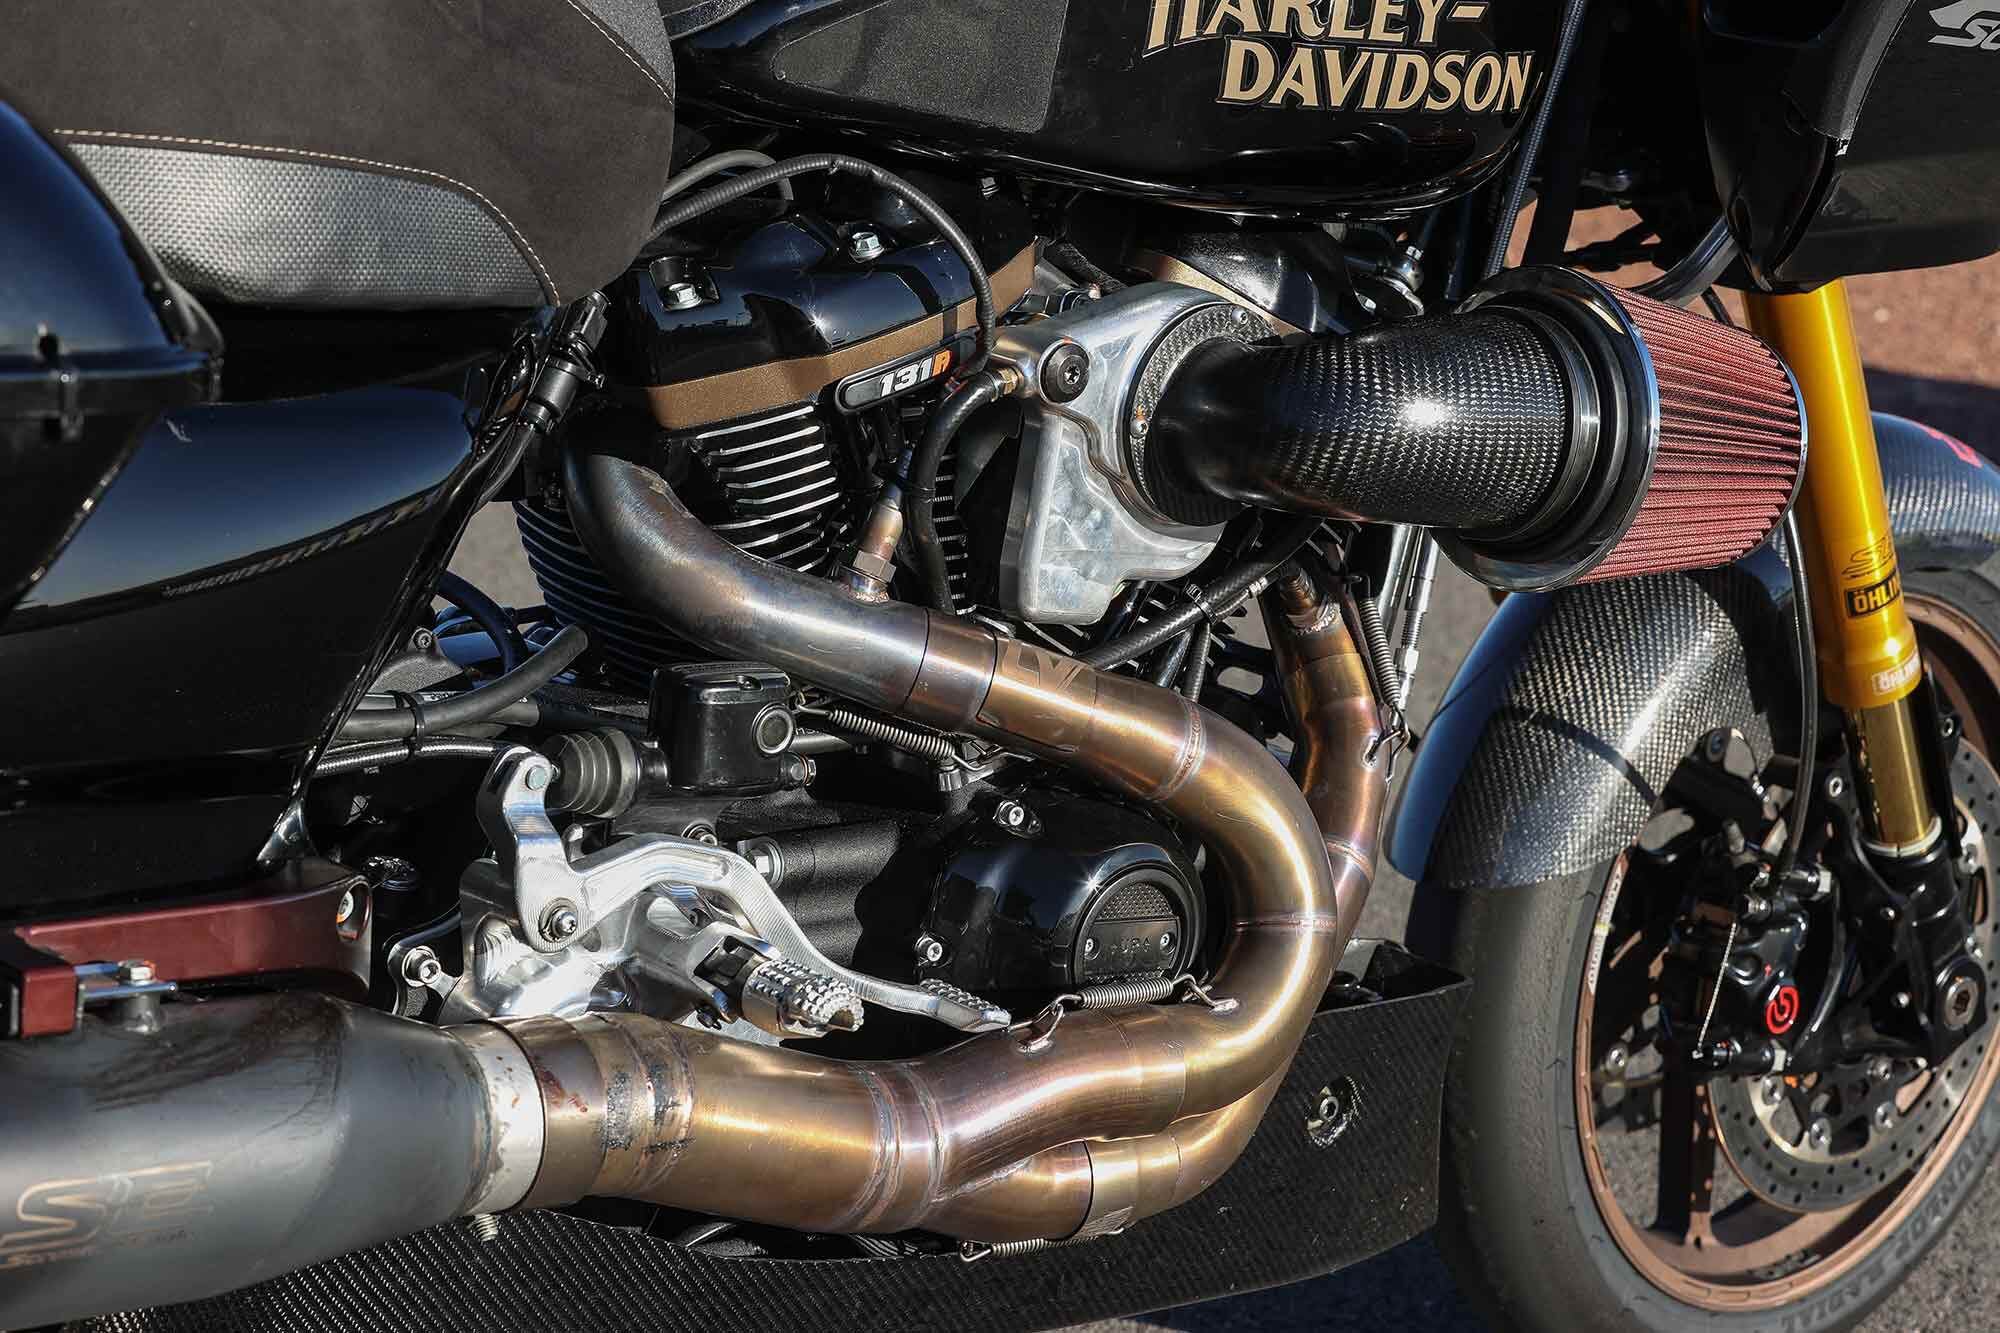 The heart of the racebike is the Screamin’ Eagle Milwaukee-Eight 131 Performance Crate Engine, which is available via H-D’s legendary parts catalog. Although it’s been highly modified for peak performance and optimized running temperatures, and dubbed the 131R.